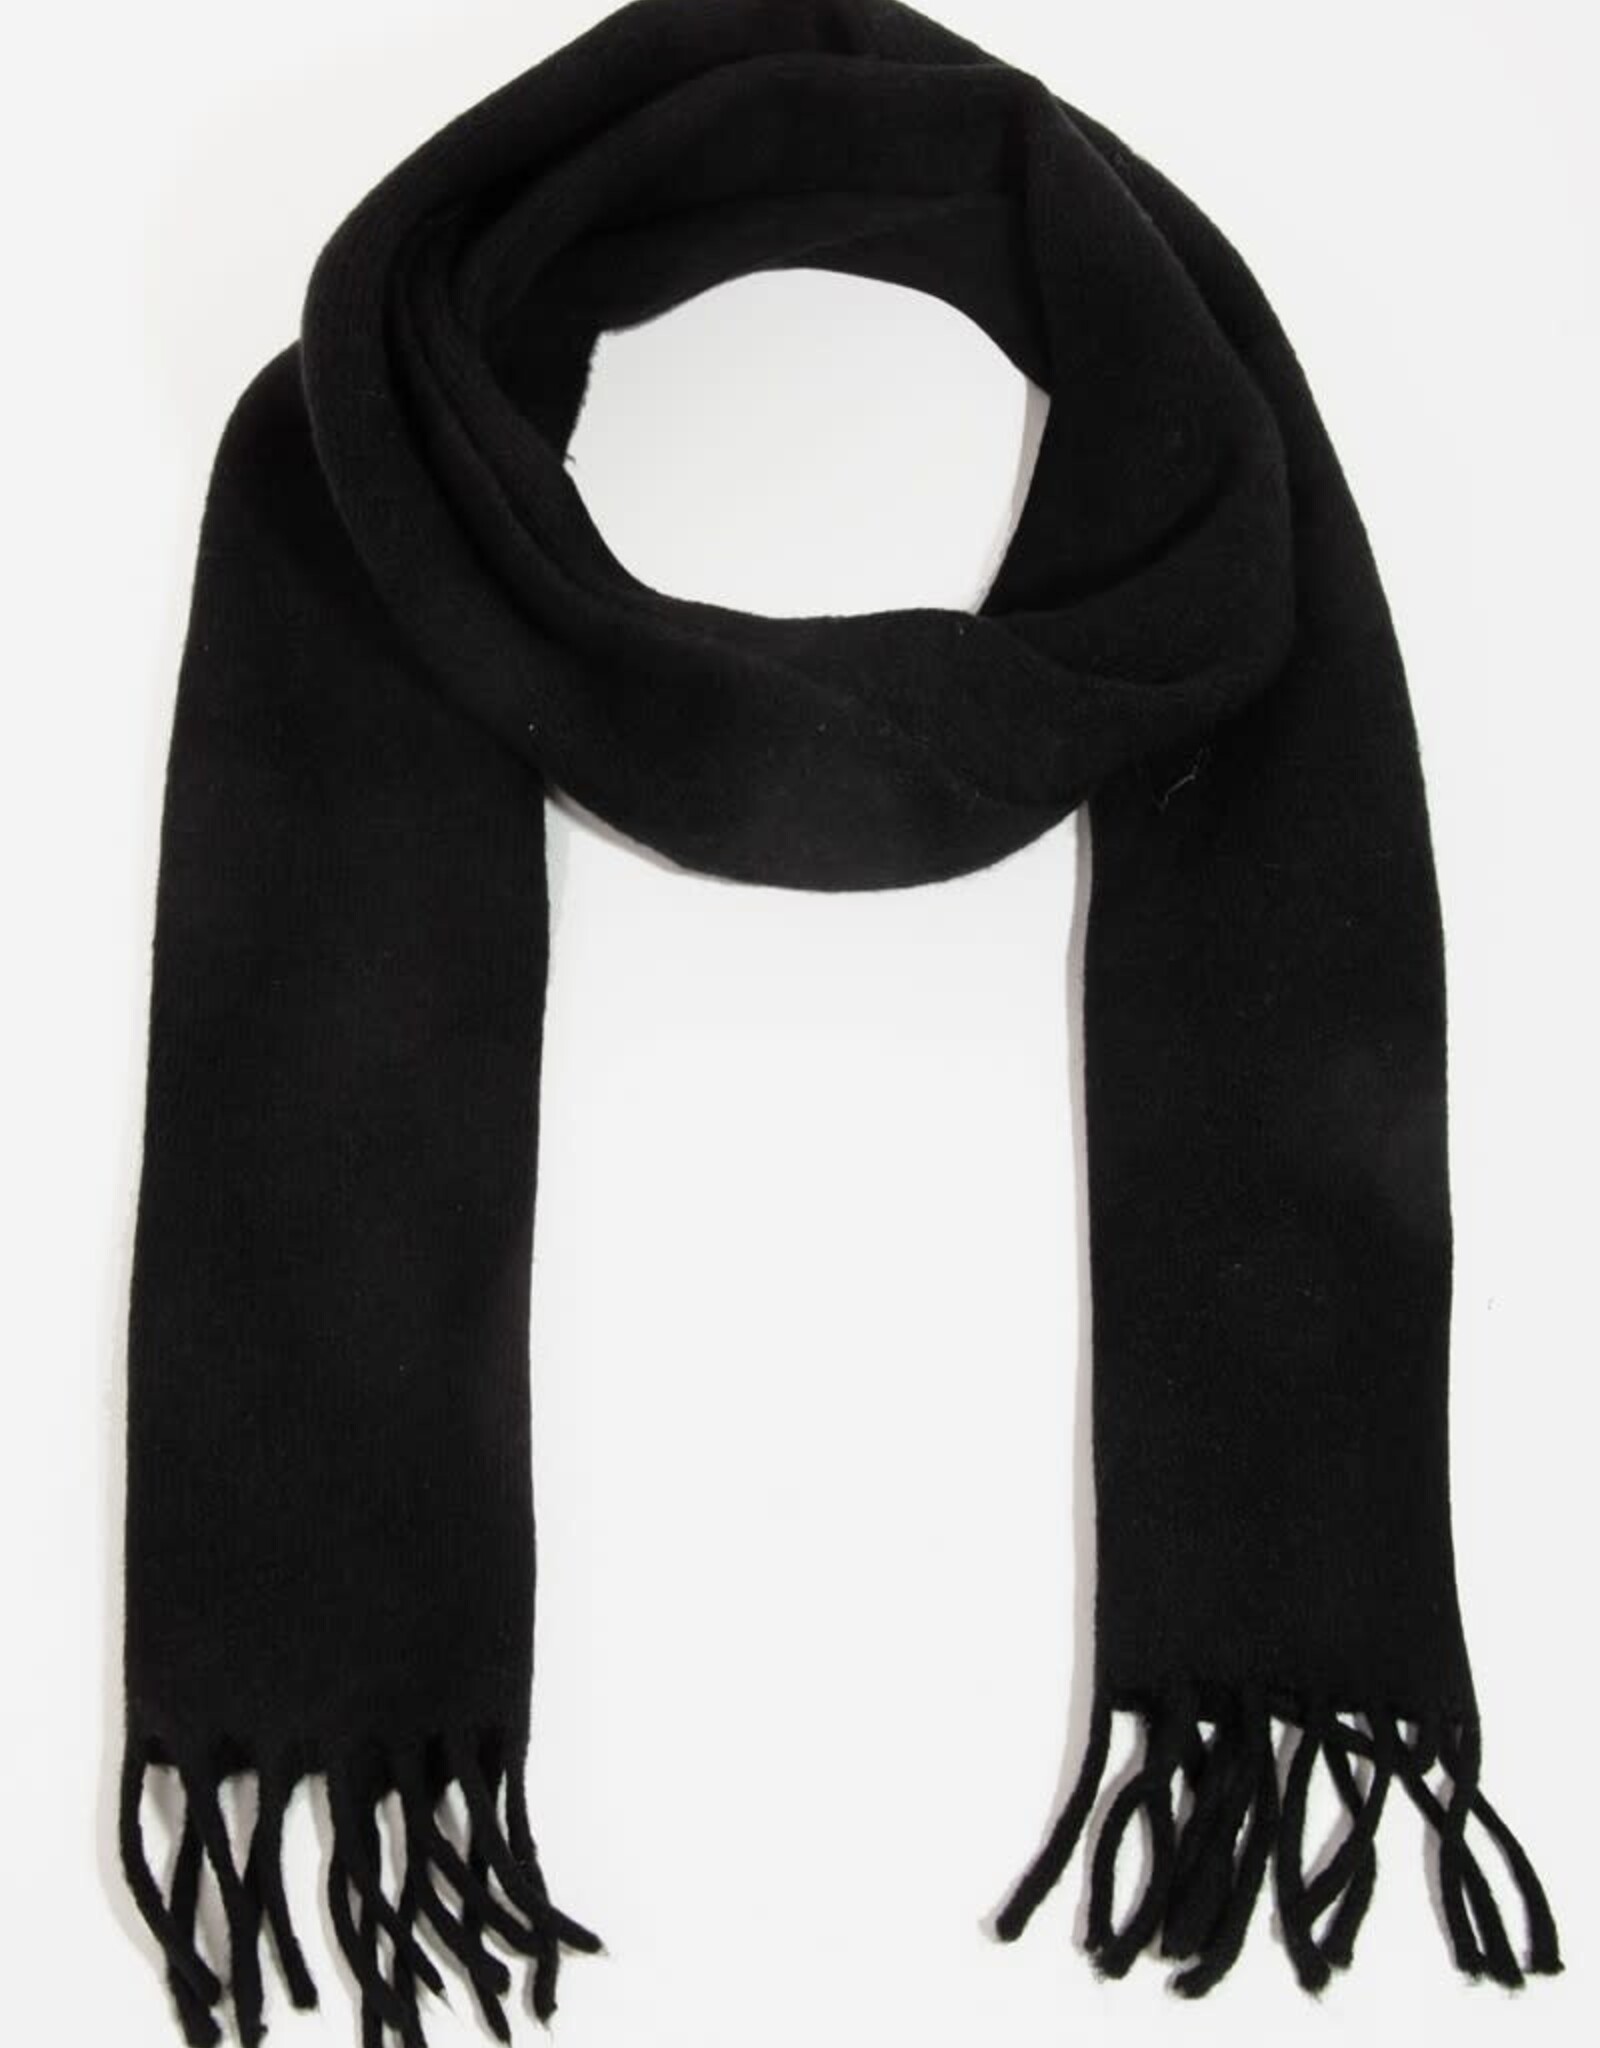 Fame Accessories Soft Knitted Fringe Scarf-Black